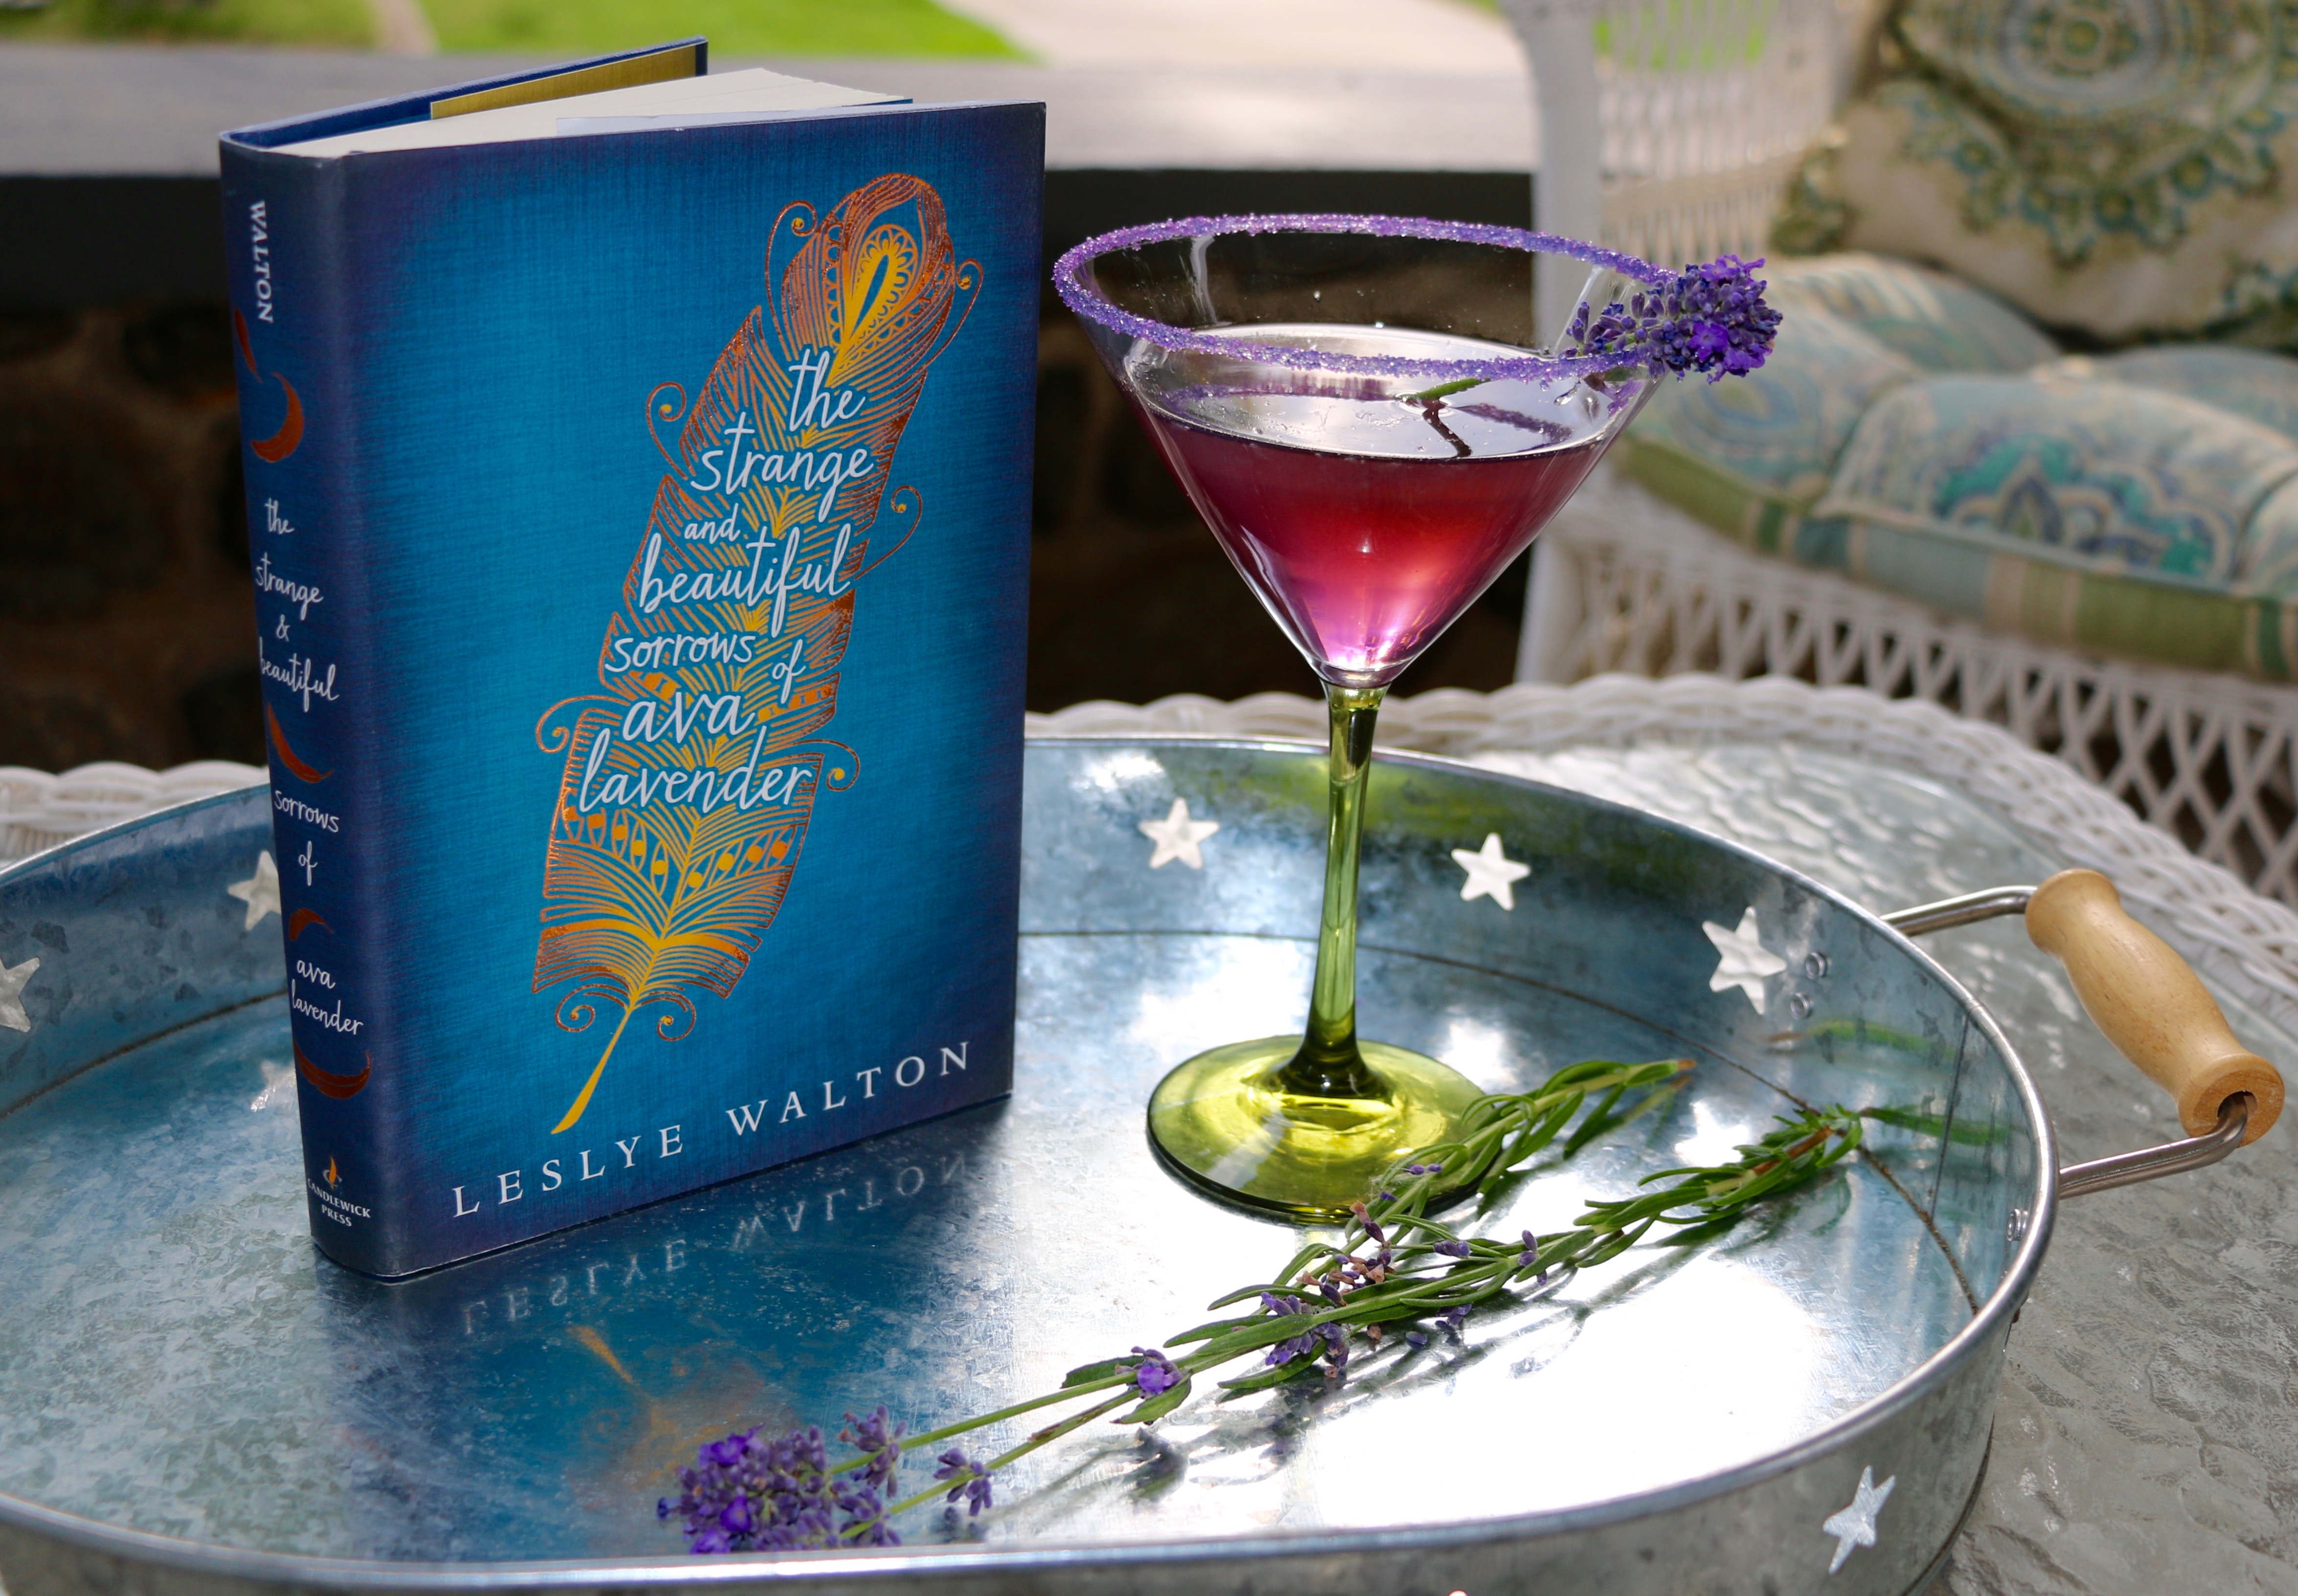 The Strange and Beautiful Sorrows of Ava Lavender and Lavender Martini